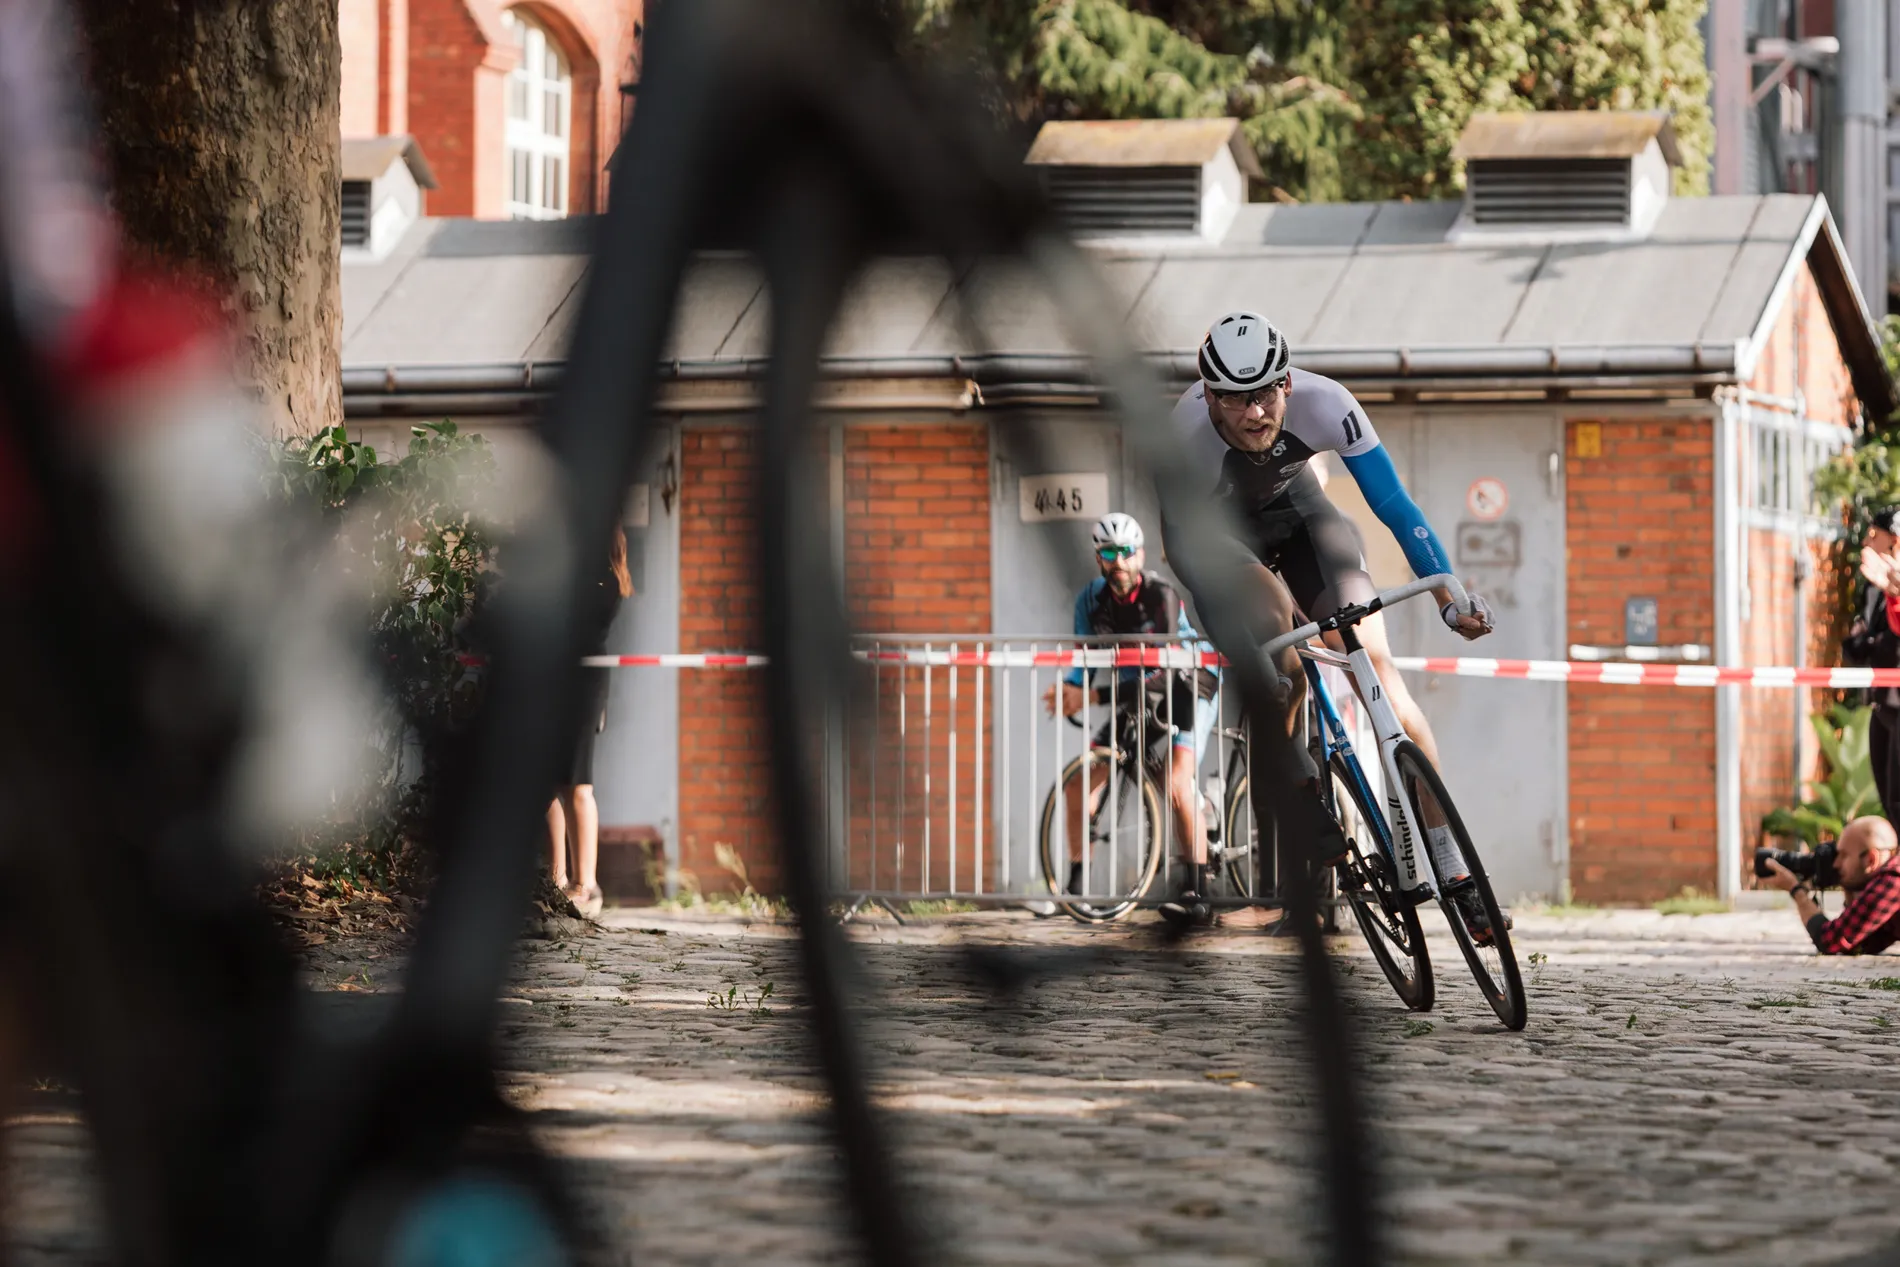 The SBSB Crit organized by Standert Bicycles and Stone Brew Berlin